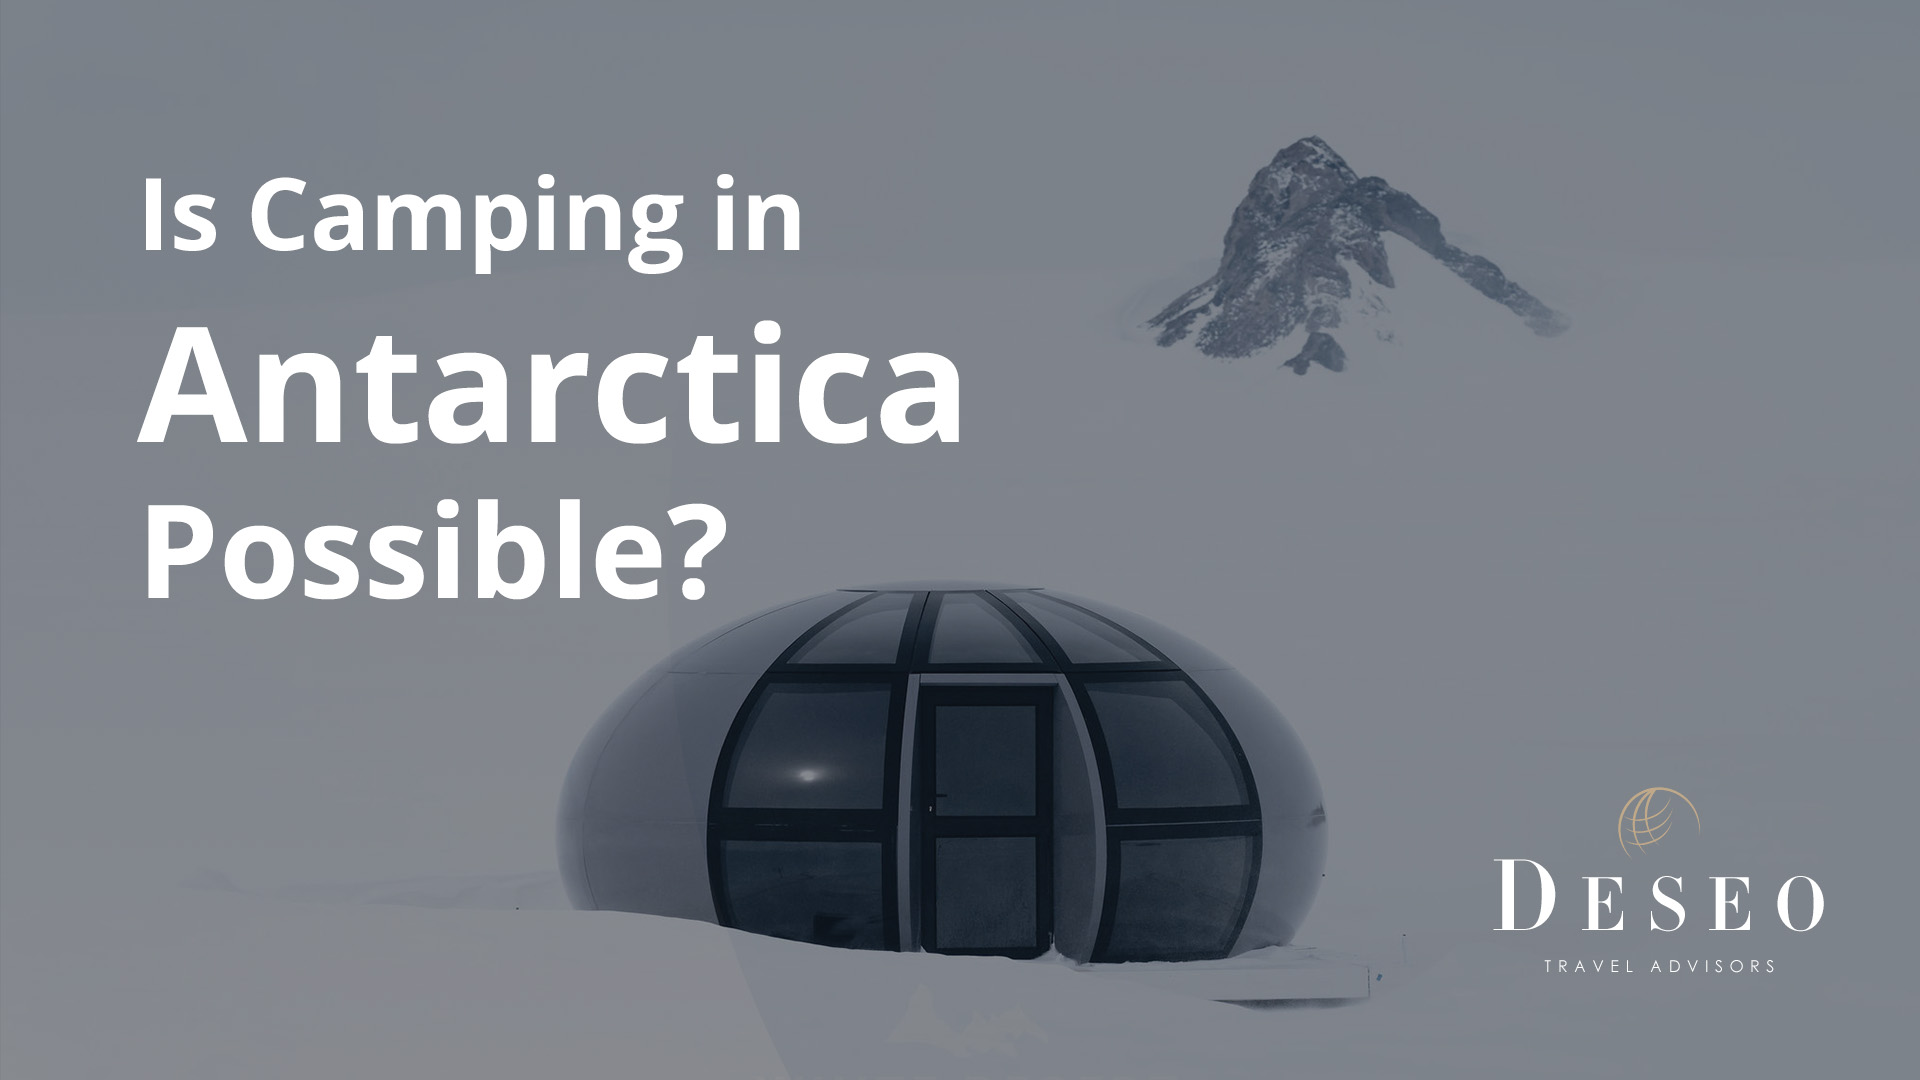 Is Camping in Antarctica Possible?